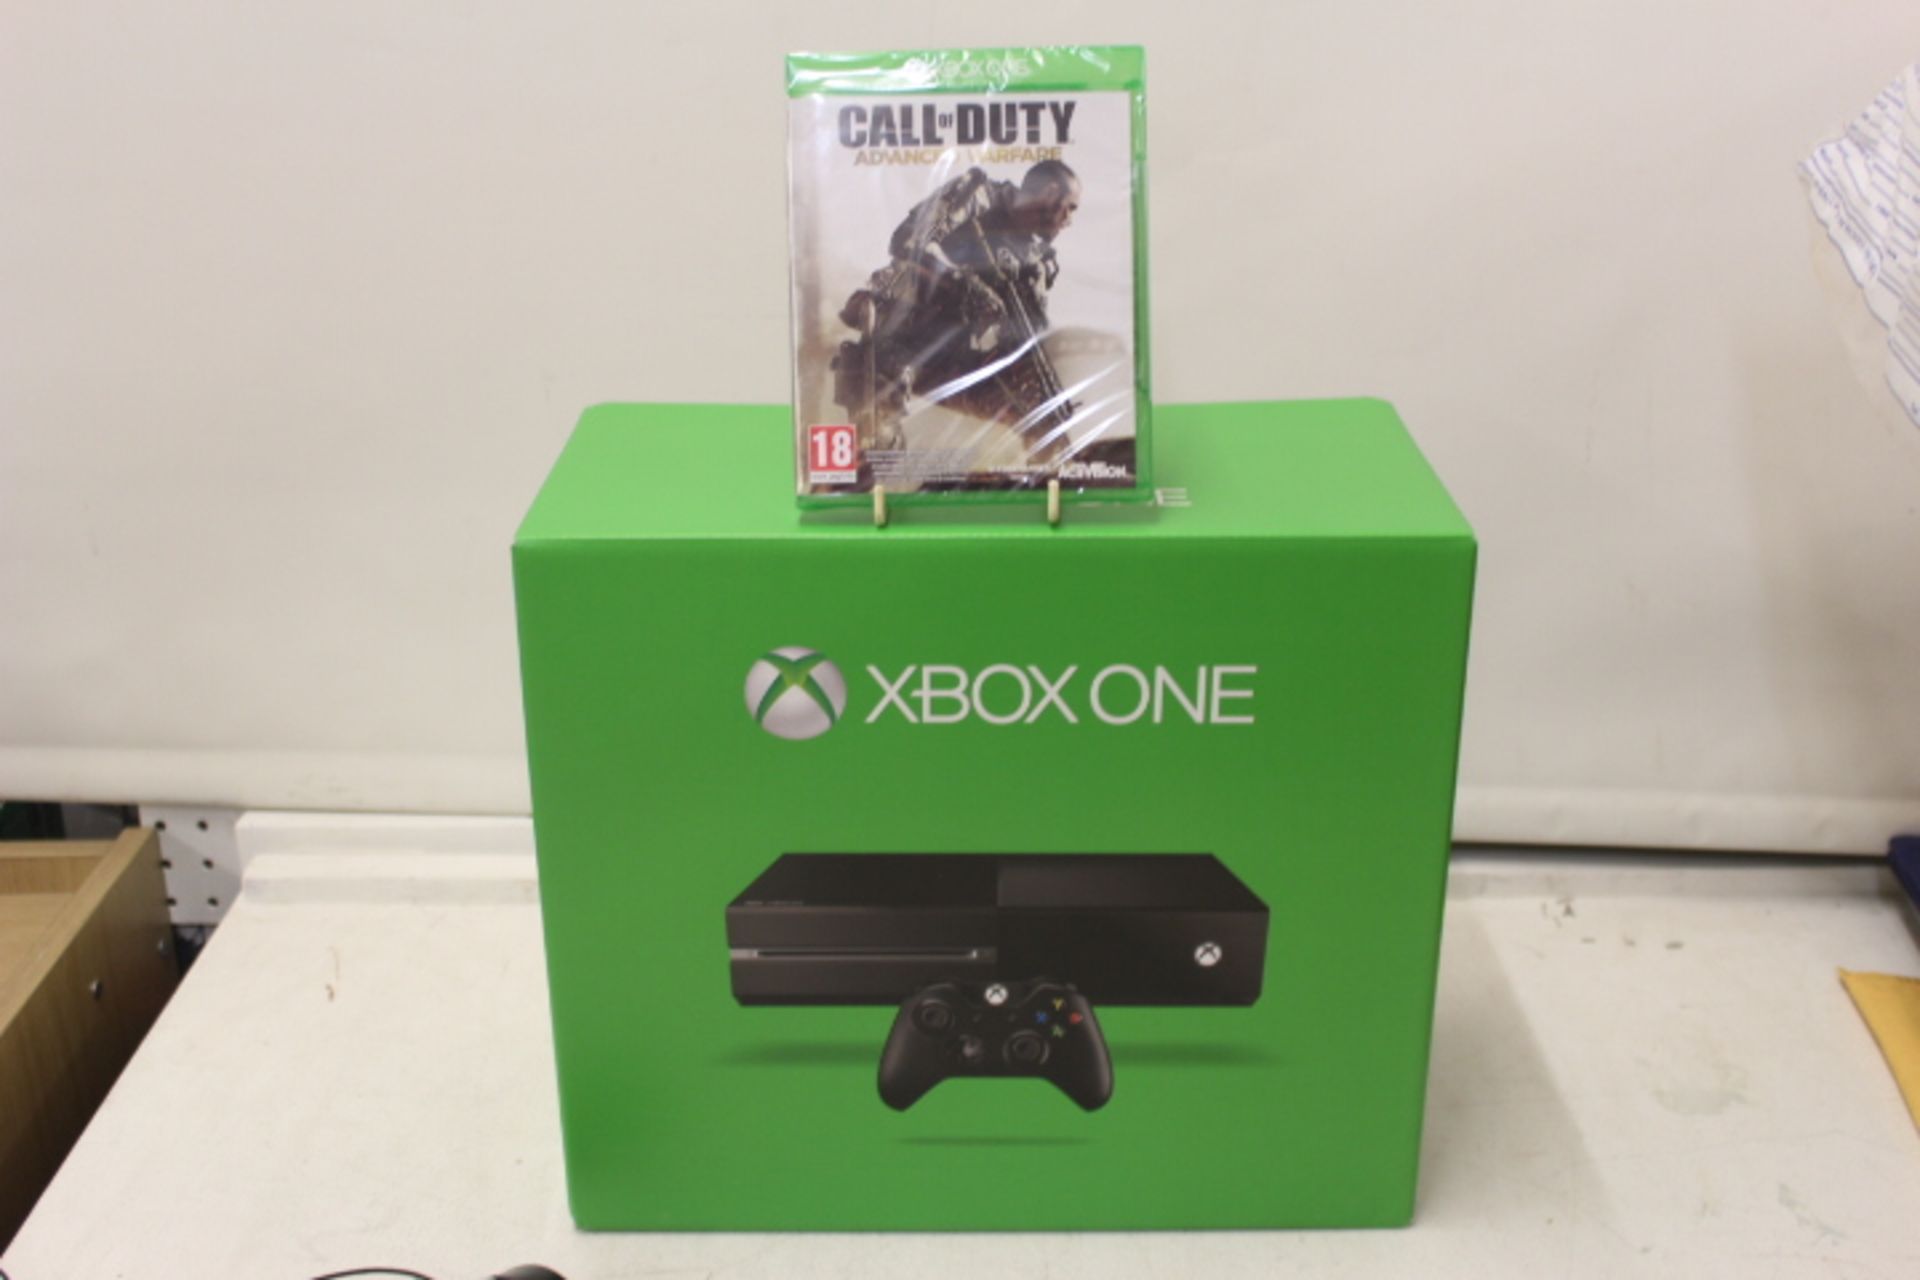 V Grade A Microsoft XBox One Game Console With Call Of Duty Game